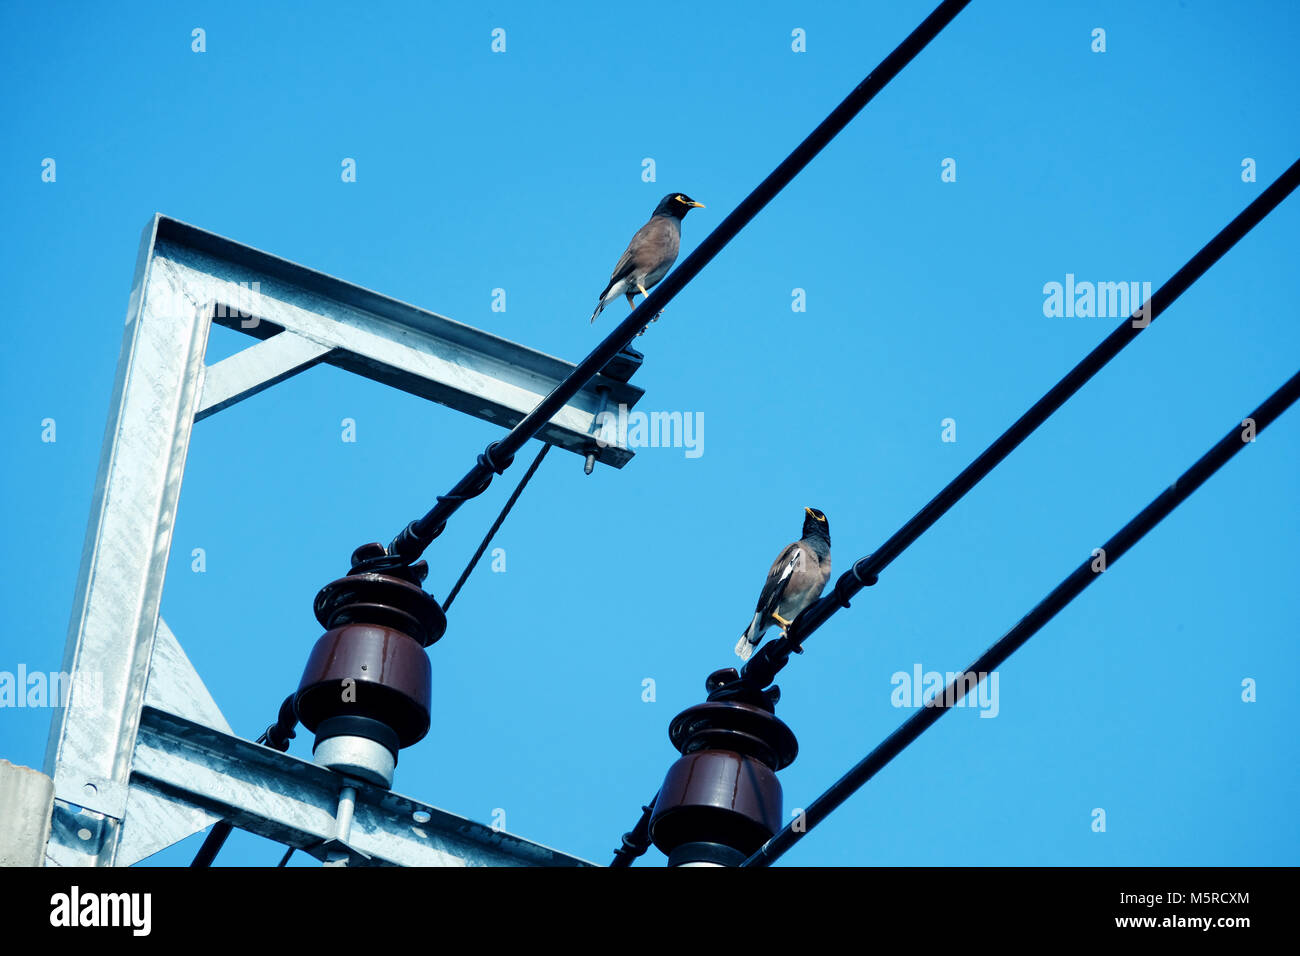 Two pigeon birds stand on electric cable wires with cleary blue sky, horizontal shot Stock Photo